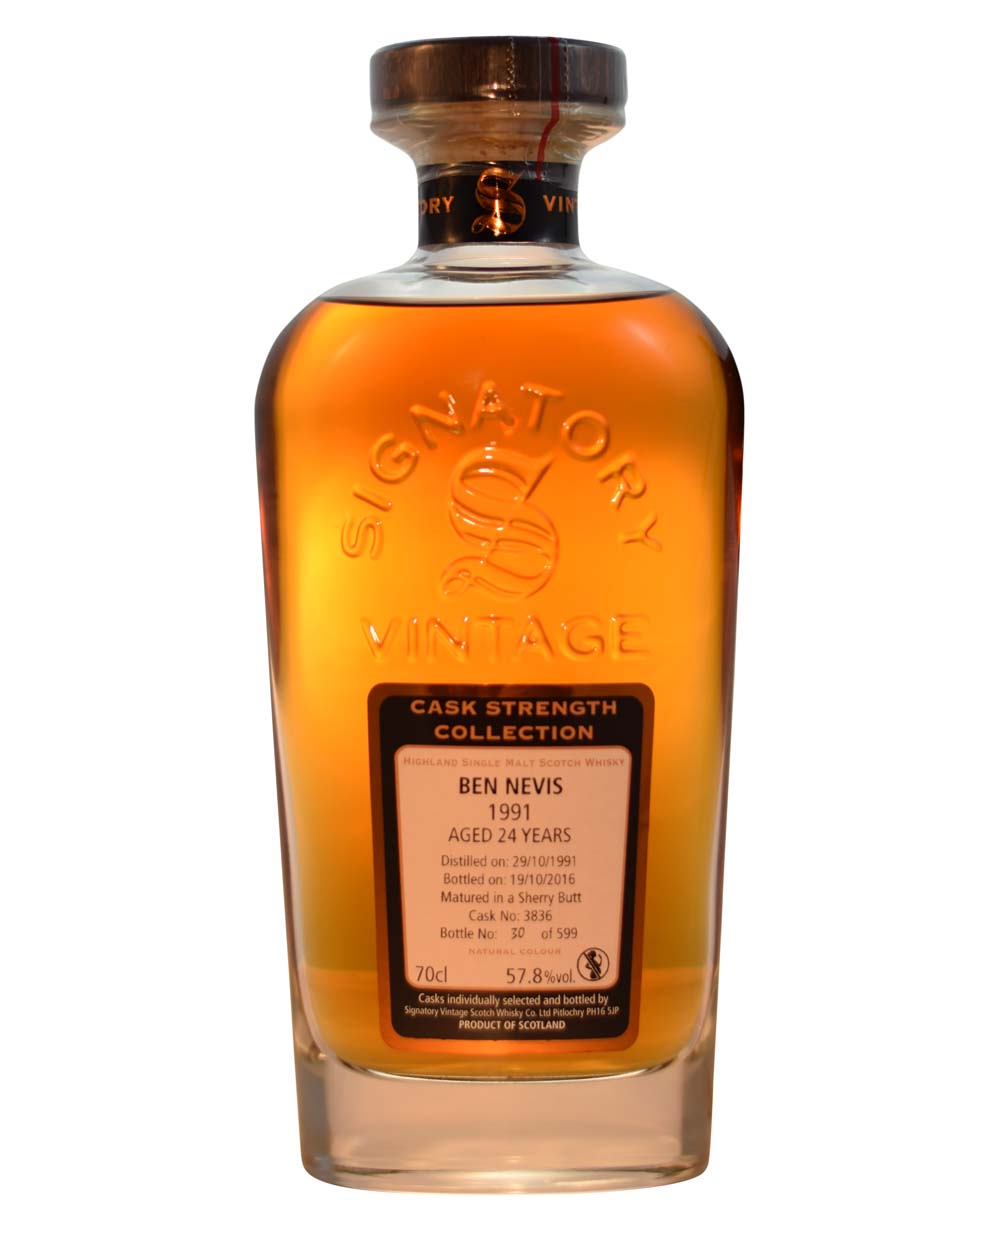 Ben Nevis 1991 - 24 Years Old Signatory Vintage Musthave Malts MHM